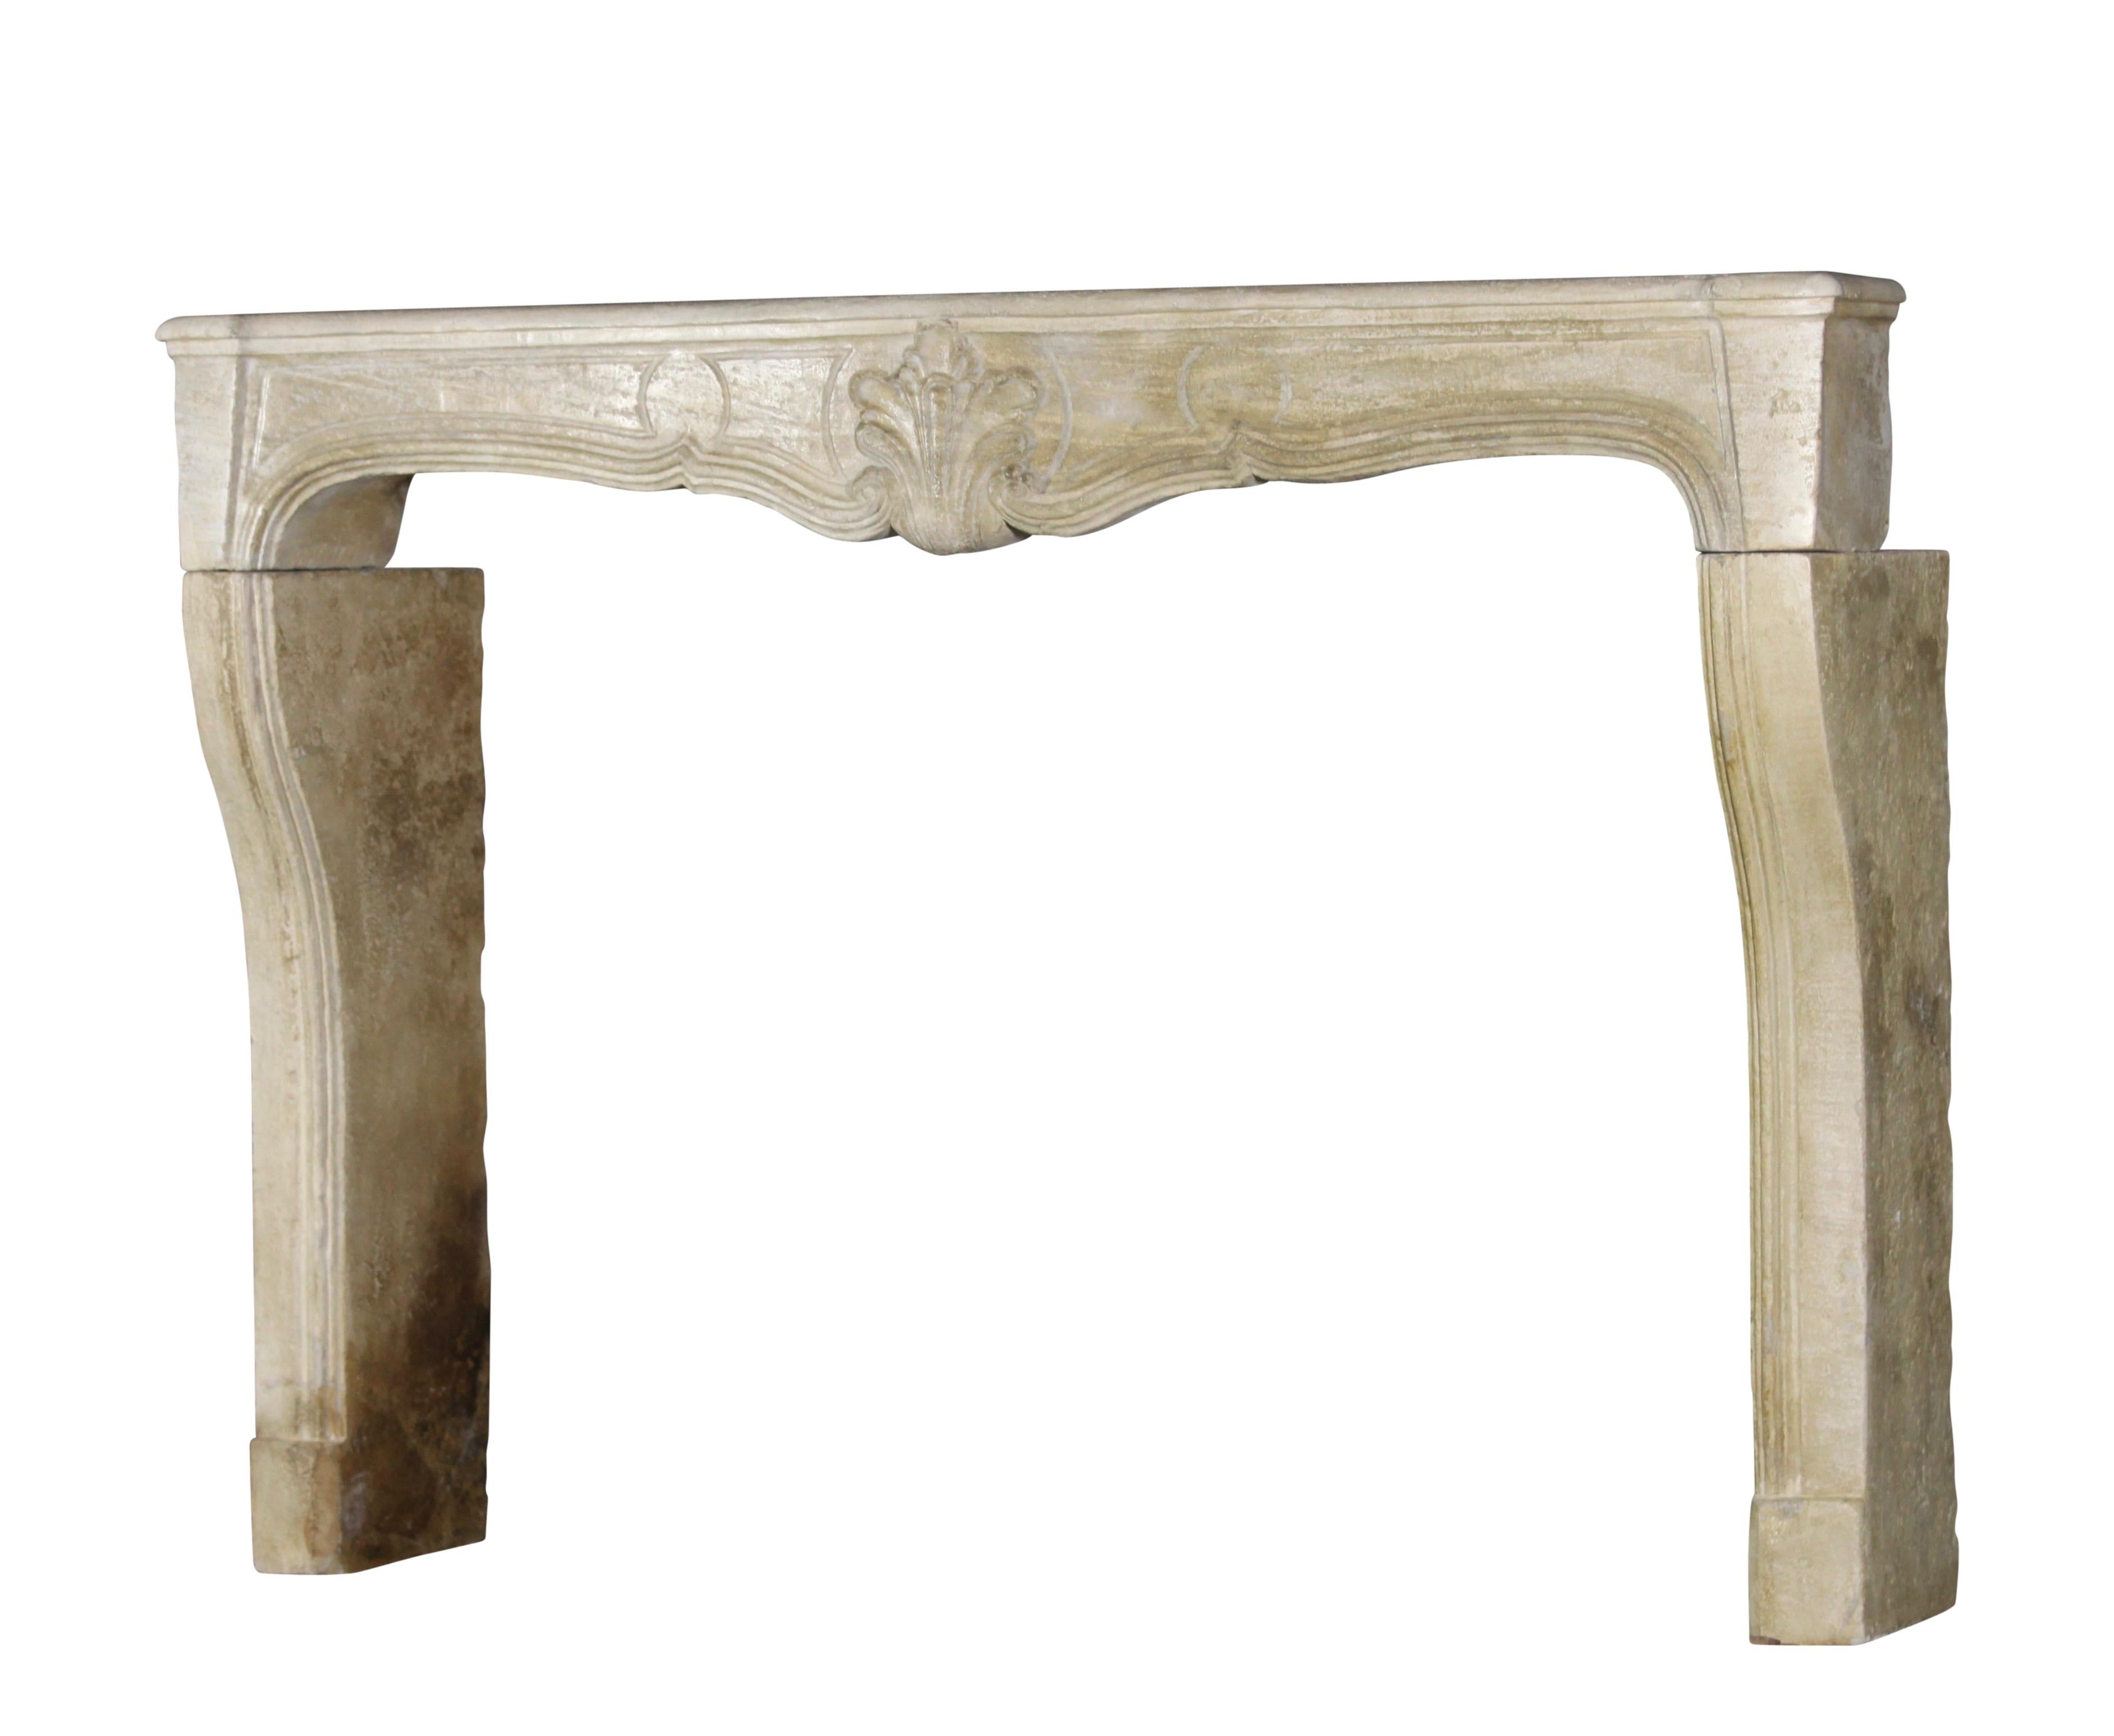 Polished 18th Century French Country Antique Fireplace Surround in Limestone